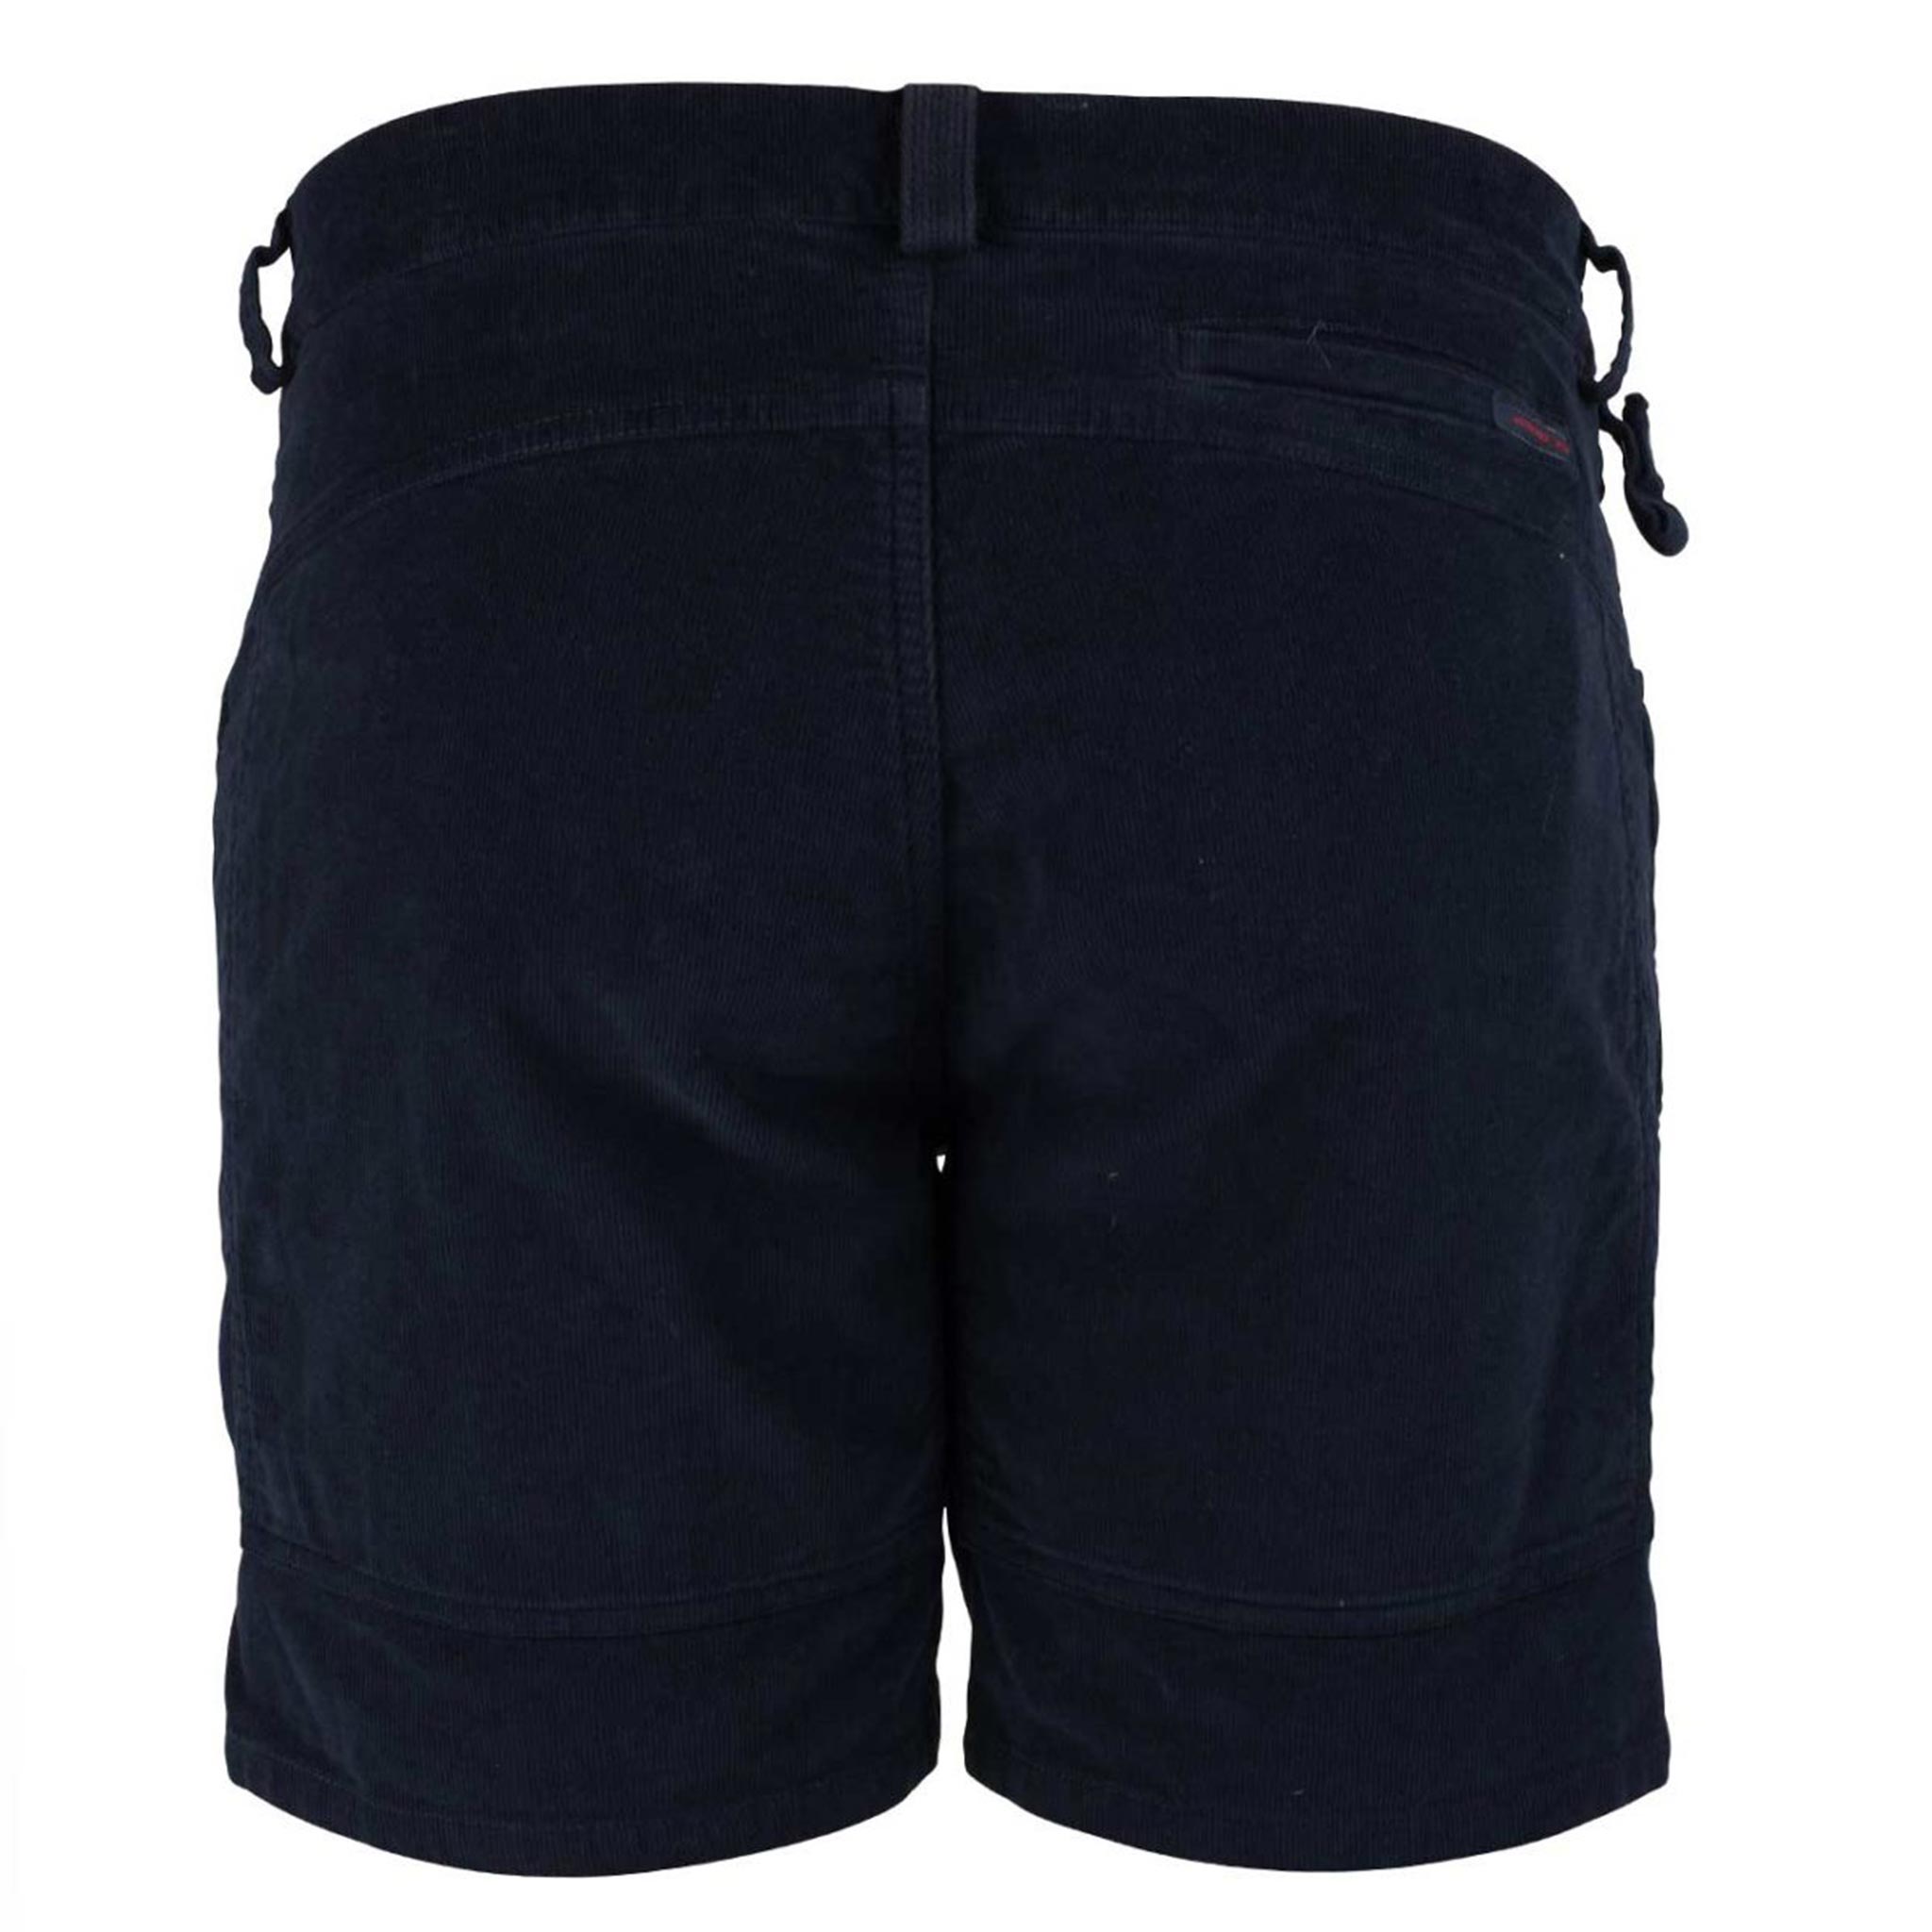 Concord Shorts in Faded Navy